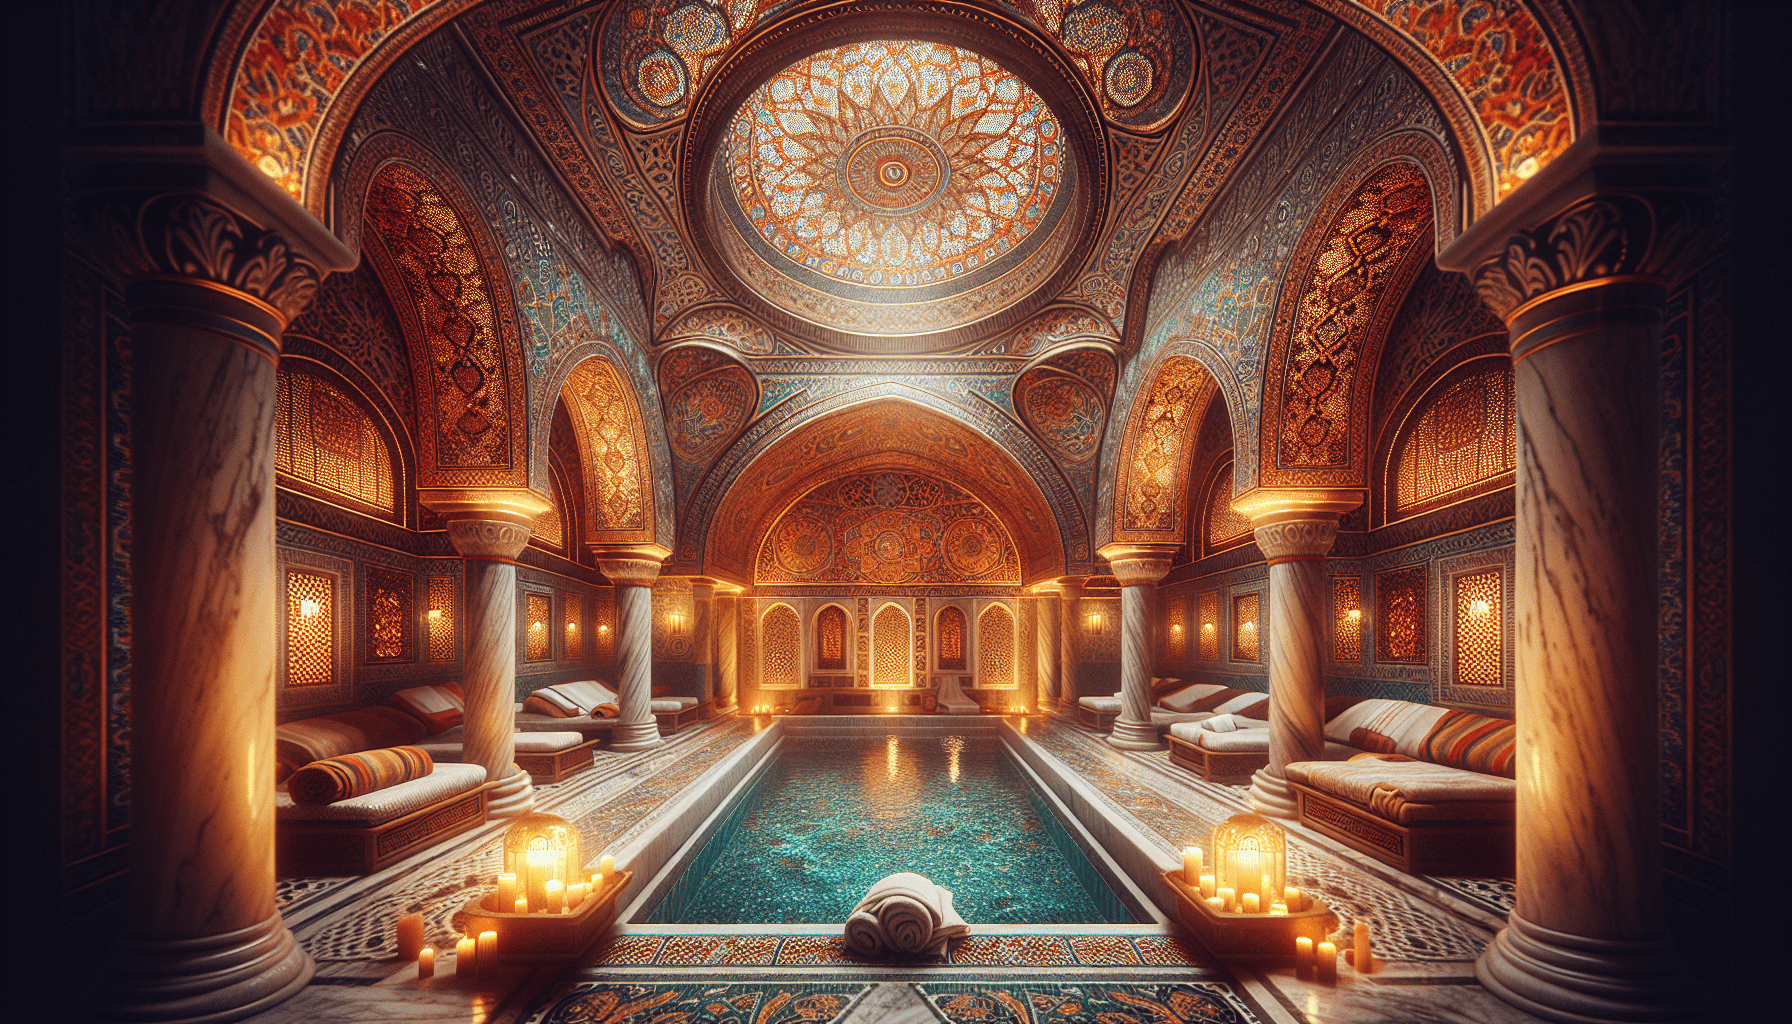 Ornate indoor pool room featuring intricate islamic art, arches, and a star-patterned dome ceiling, illuminated by soft lights and candles.